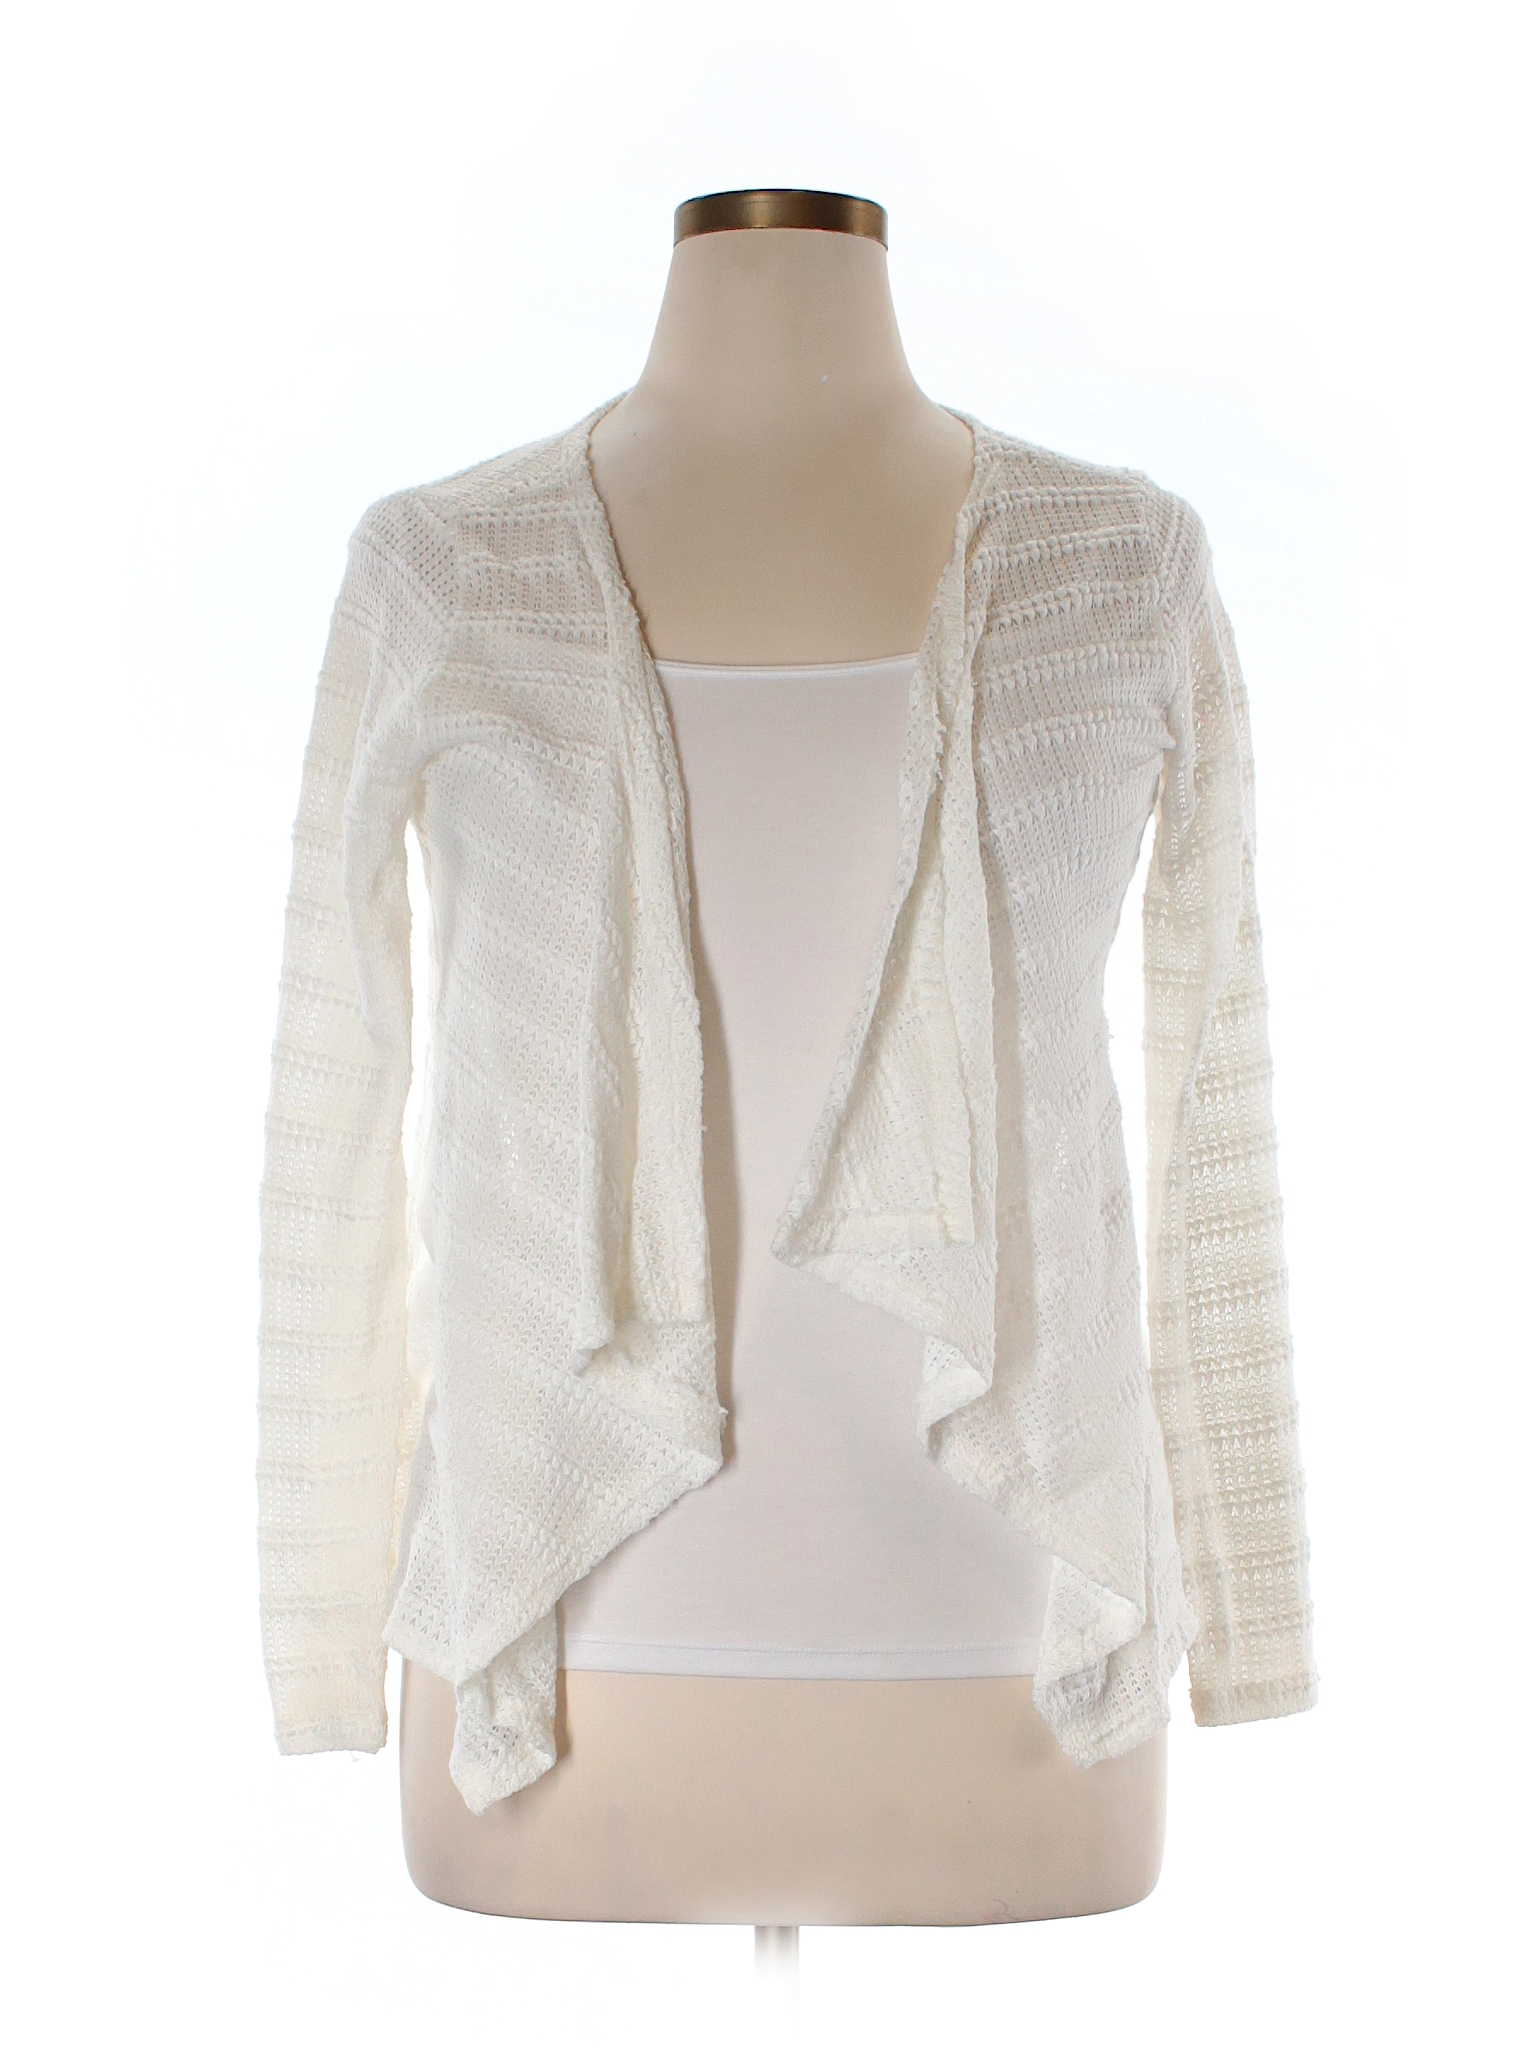 Papermoon Solid White Cardigan Size XL - 67% off | thredUP